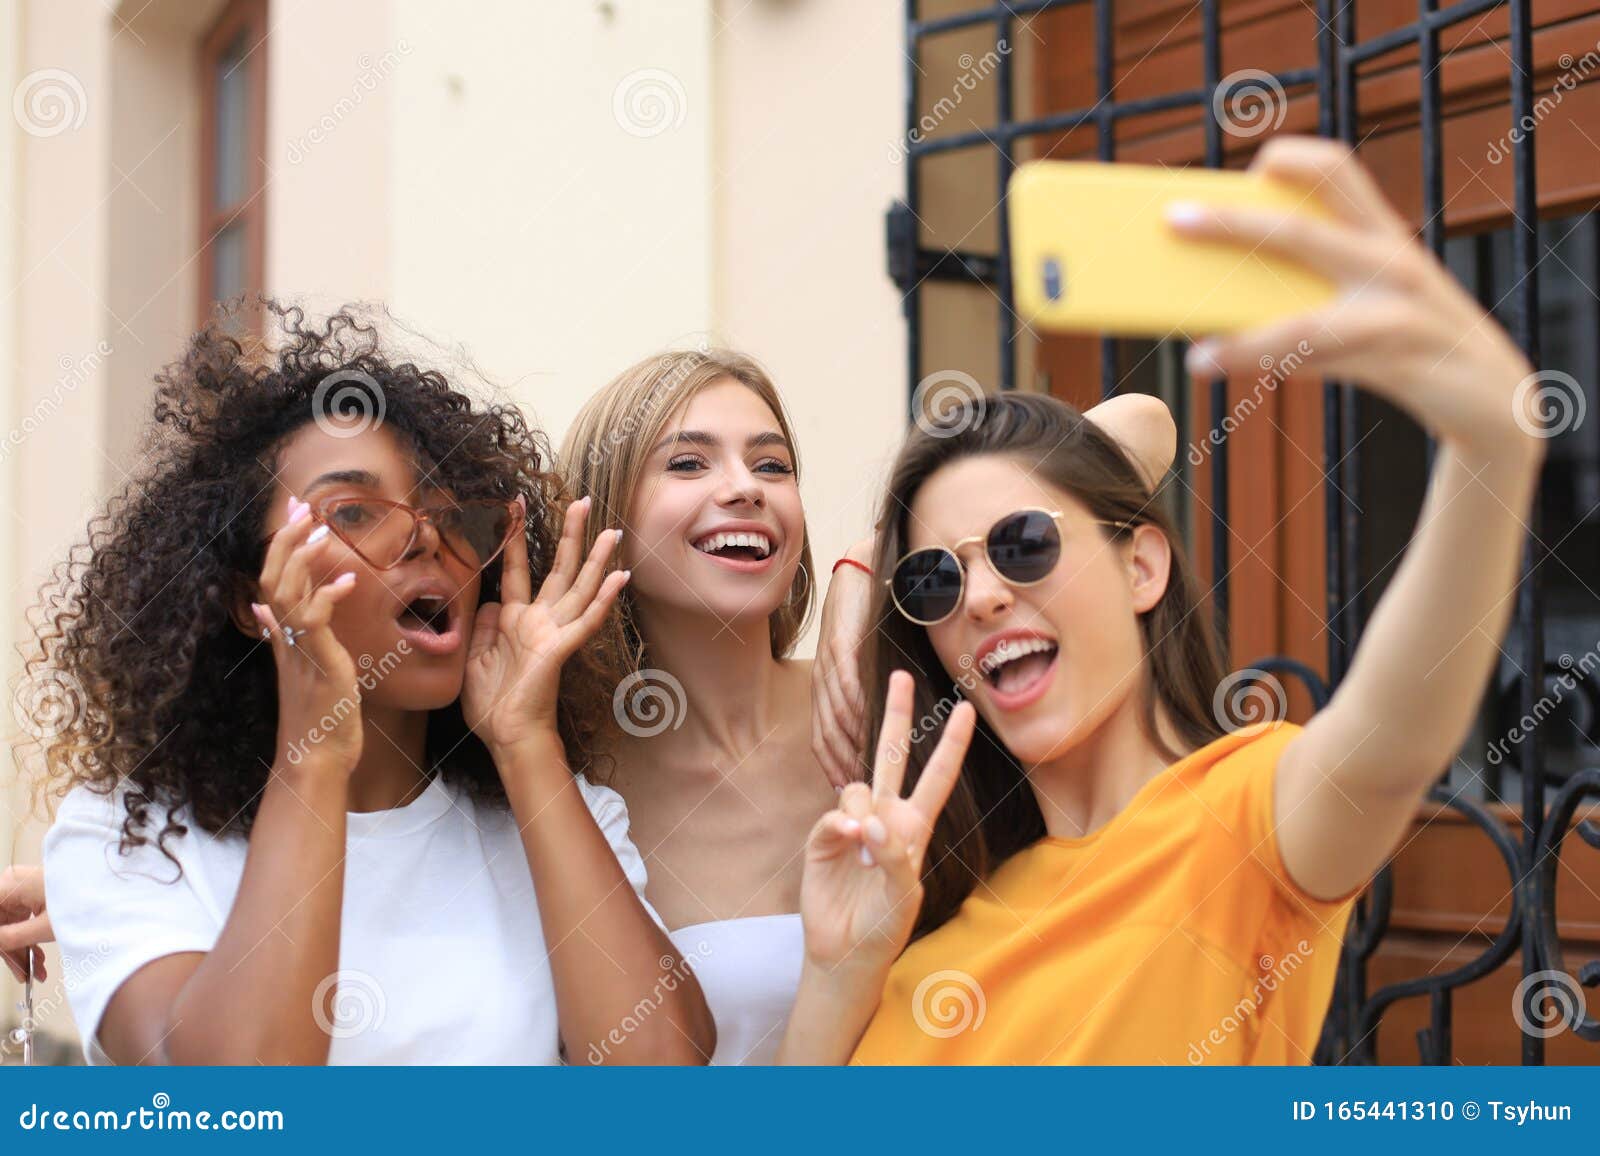 Three Cute Young Girls Friends Having Fun Together, Taking a Selfie at ...